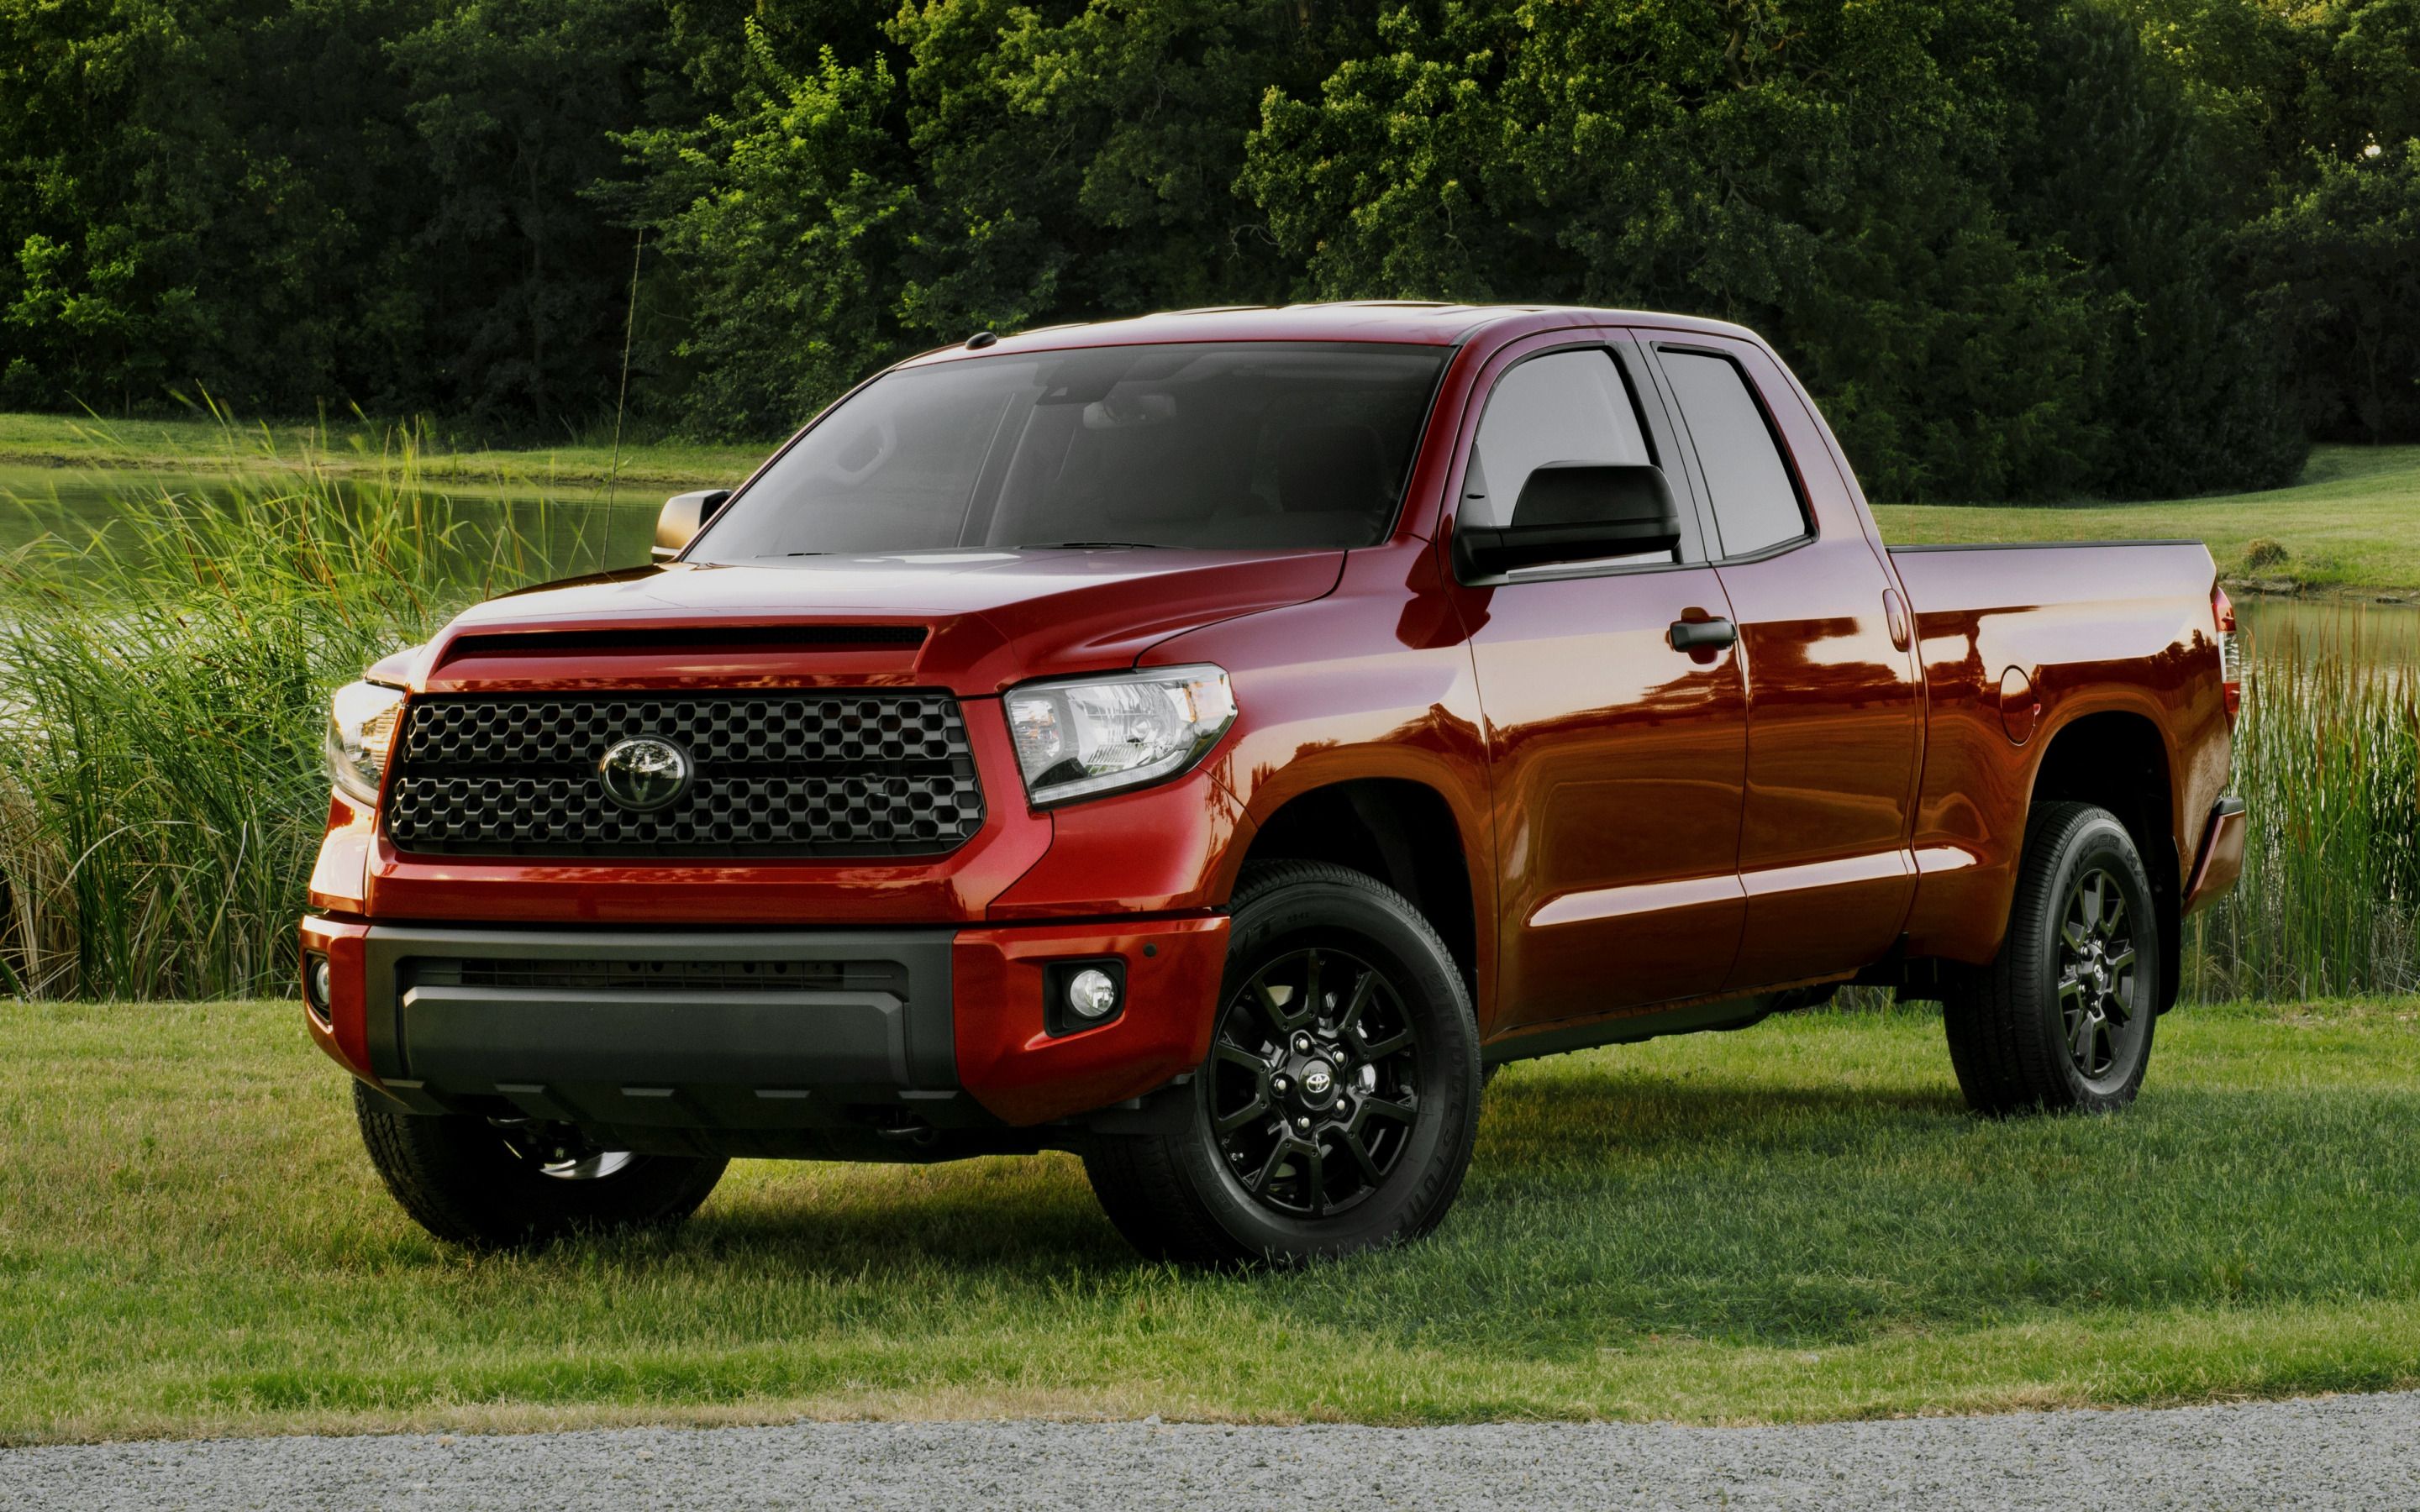 Download wallpaper Toyota Tundra, red pickup truck, exterior, front view, new red Tundra, japanese cars, Toyota for desktop with resolution 2880x1800. High Quality HD picture wallpaper